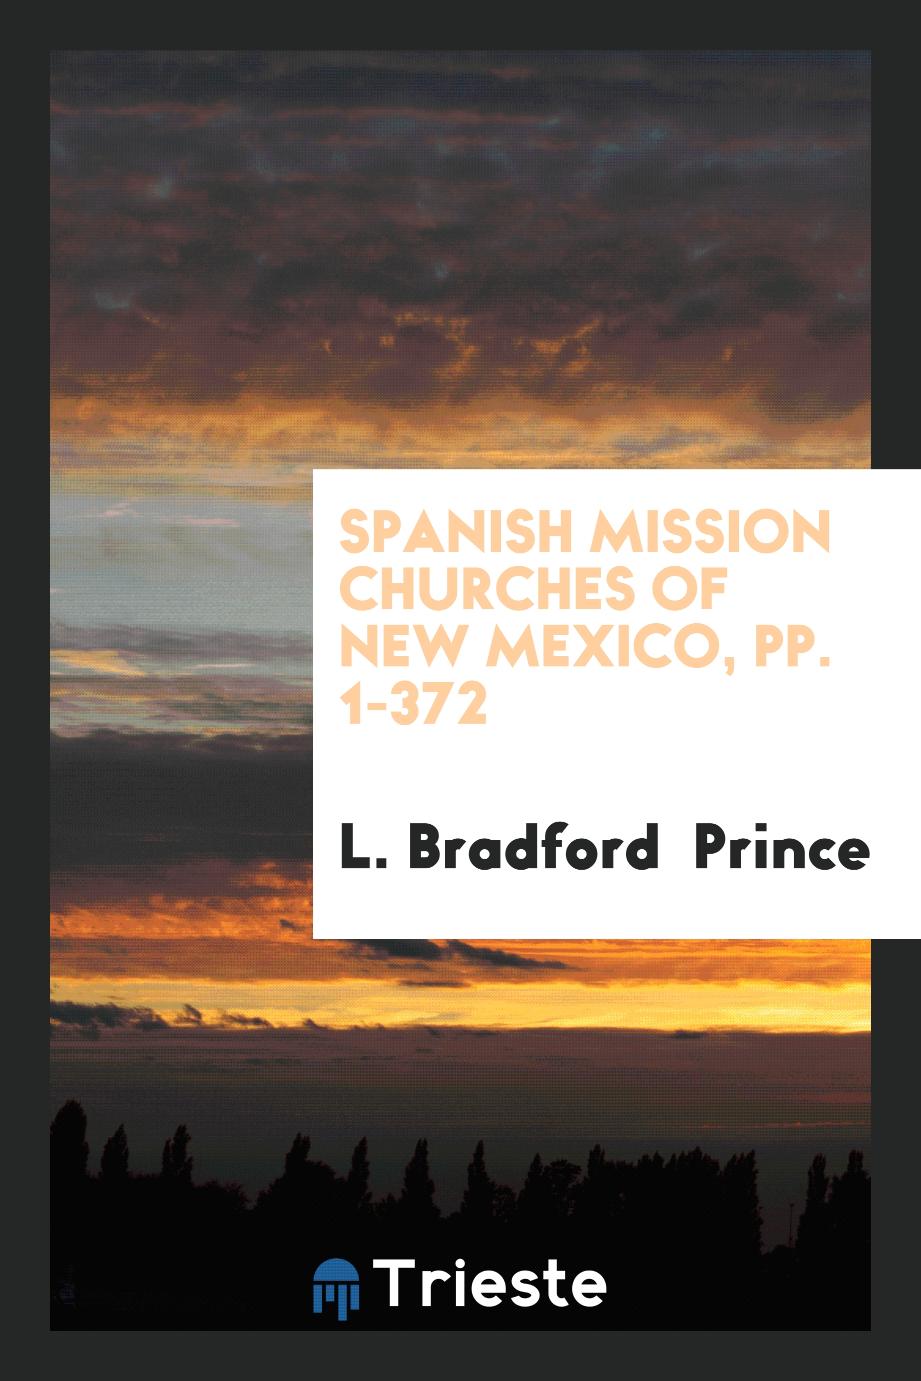 Spanish Mission Churches of New Mexico, pp. 1-372